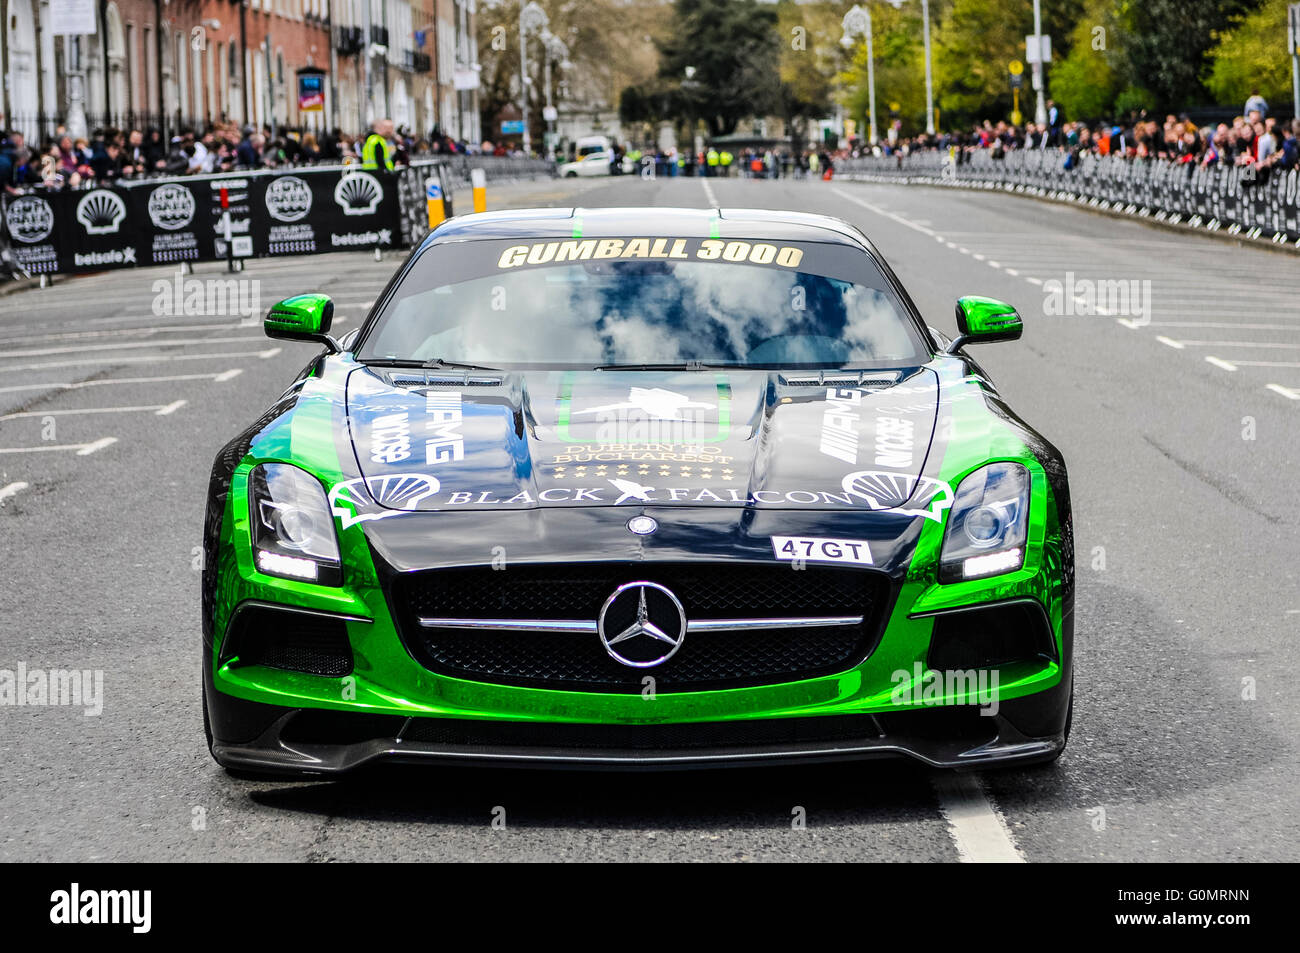 DUBLIN, IRELAND. MAY 01 2016 - A Mercedes SLS from Team Black Falcon arrives for the start of the Gumball 3000 6 day drive to Bucharest. Stock Photo